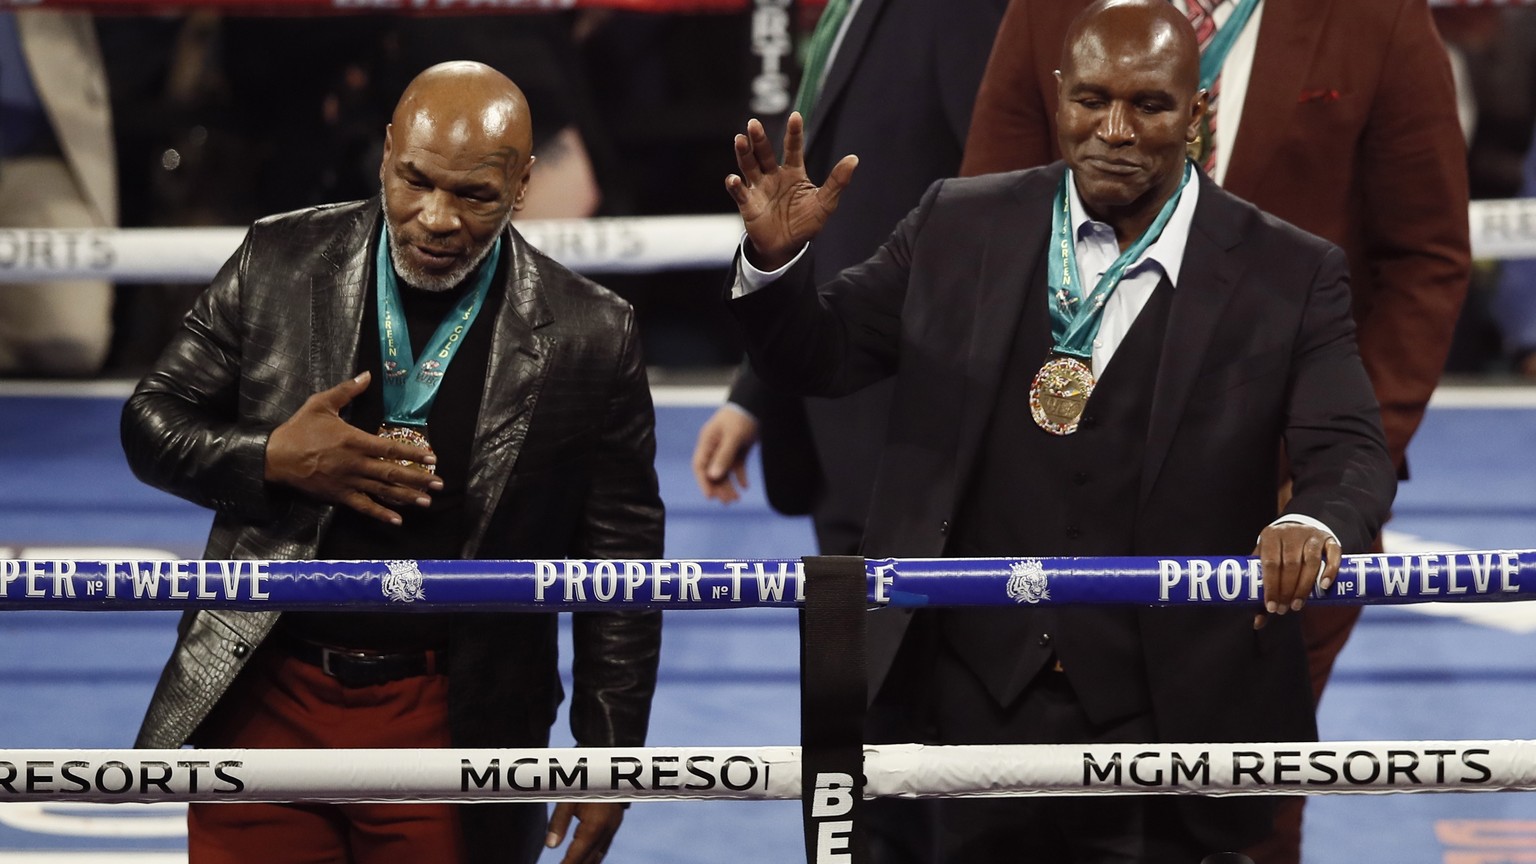 epa08239501 Former Heavyweight Champions Mike Tyson (L) and Evander Holyfield (R) acknowlege the crowd after they were honored before the main event, the WBC World Heavyweight Championship title fight ...